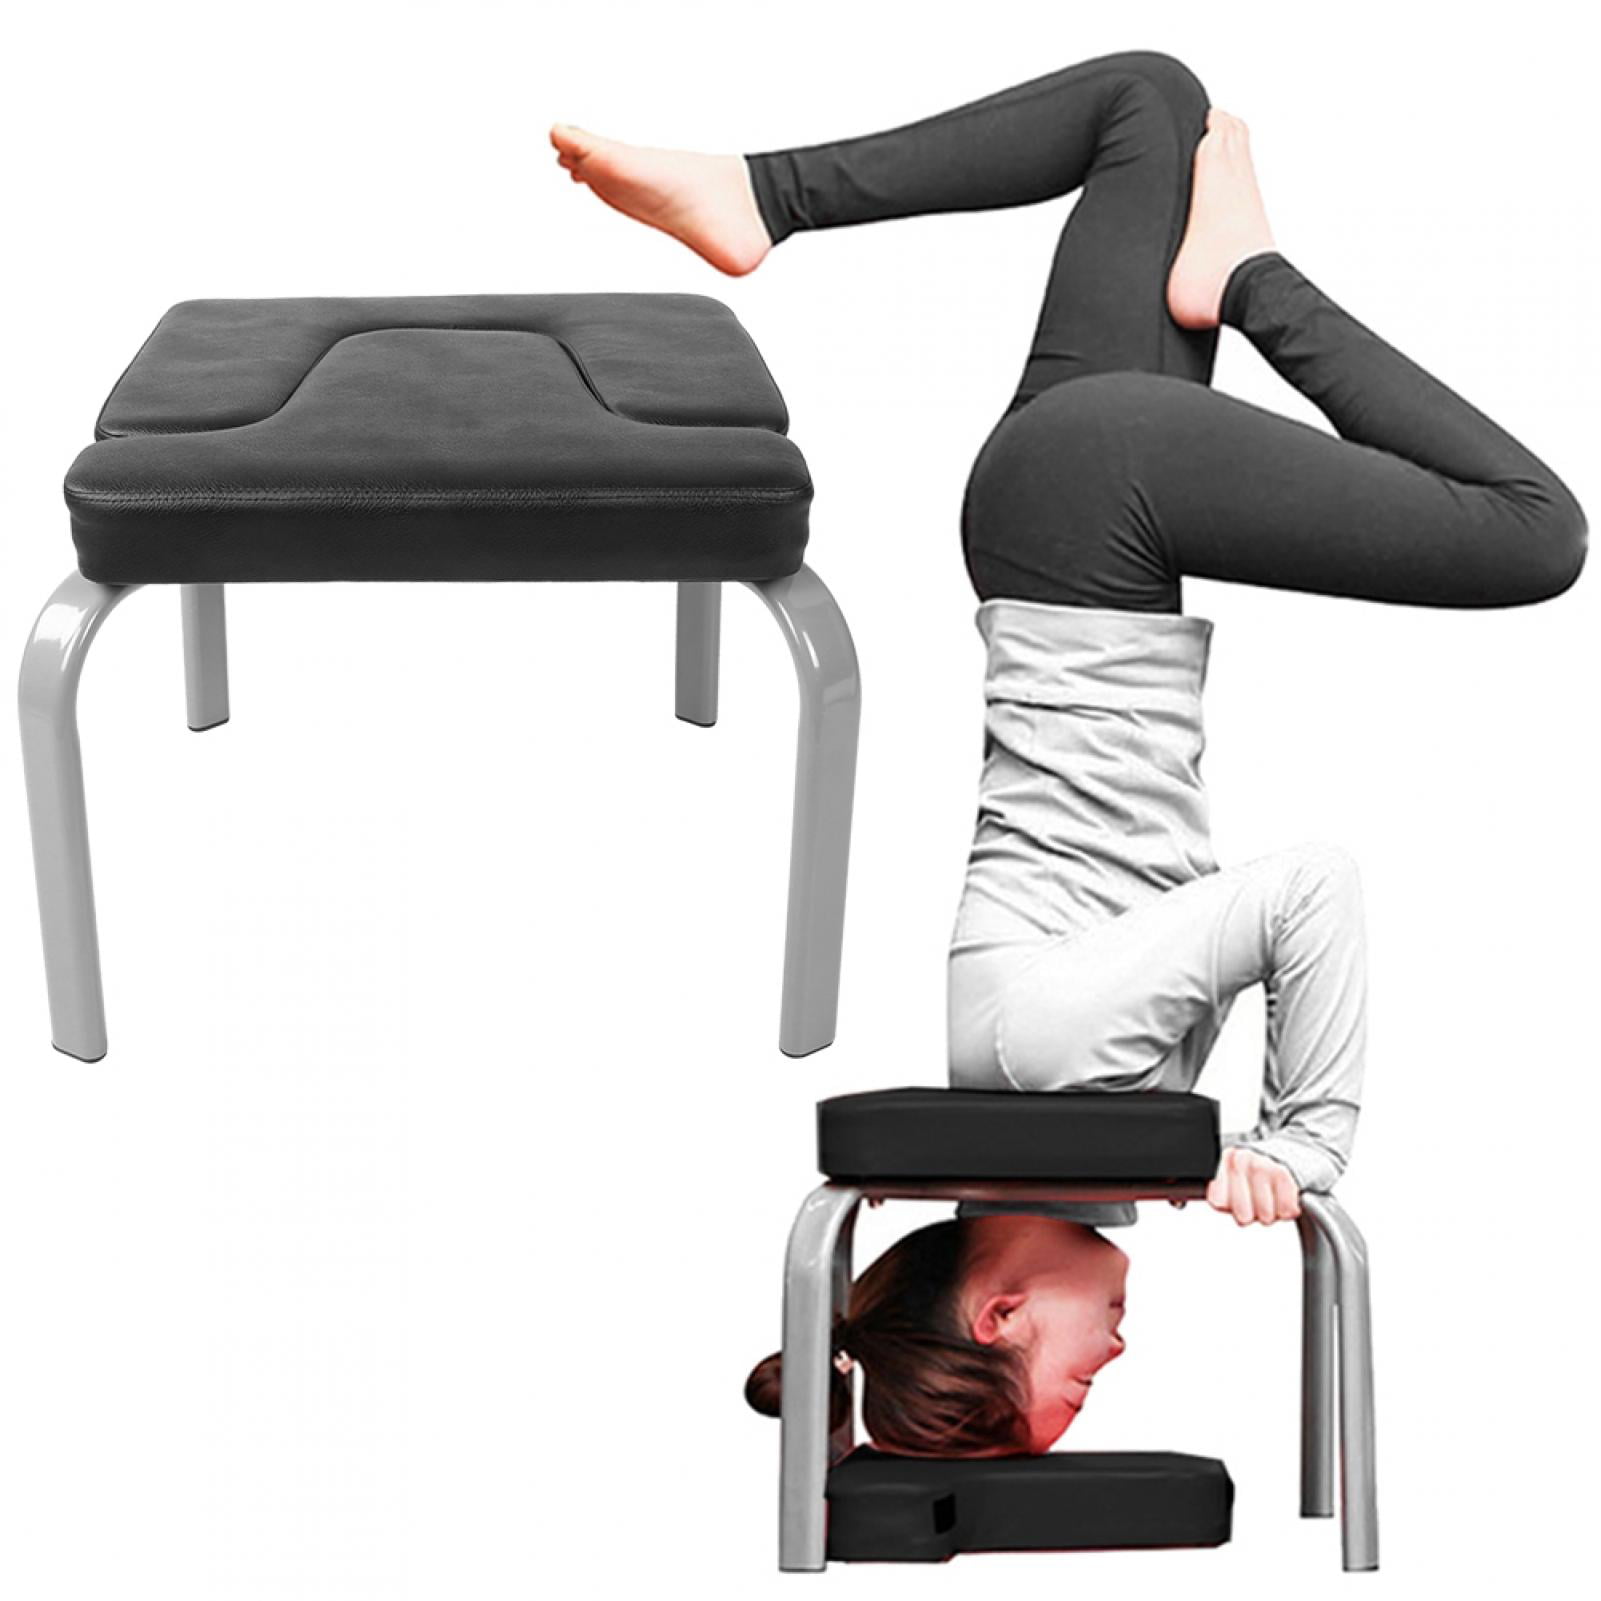 Fitness Yoga Chair Inversion Bench Workout Headstand Yoga Stool with Cushion 